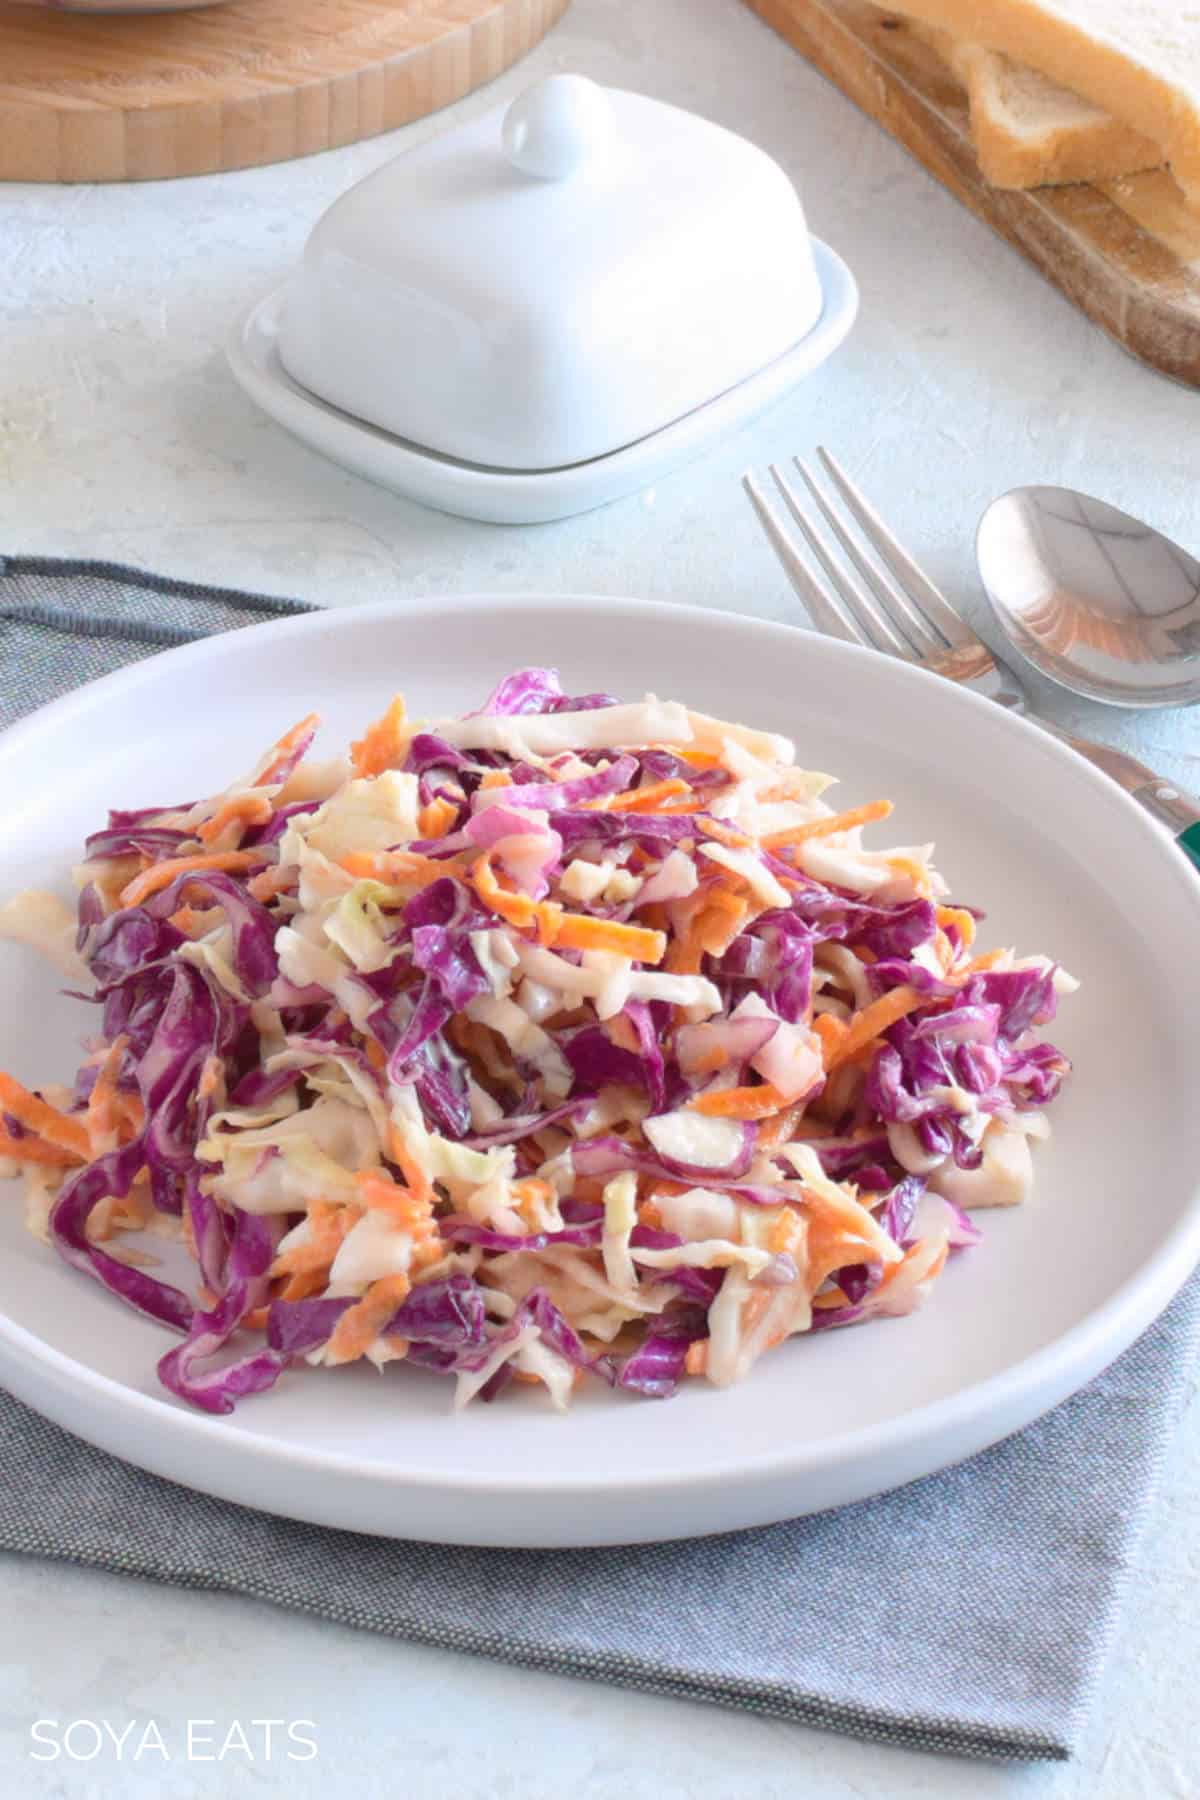 Gluten free coleslaw on a white plate.